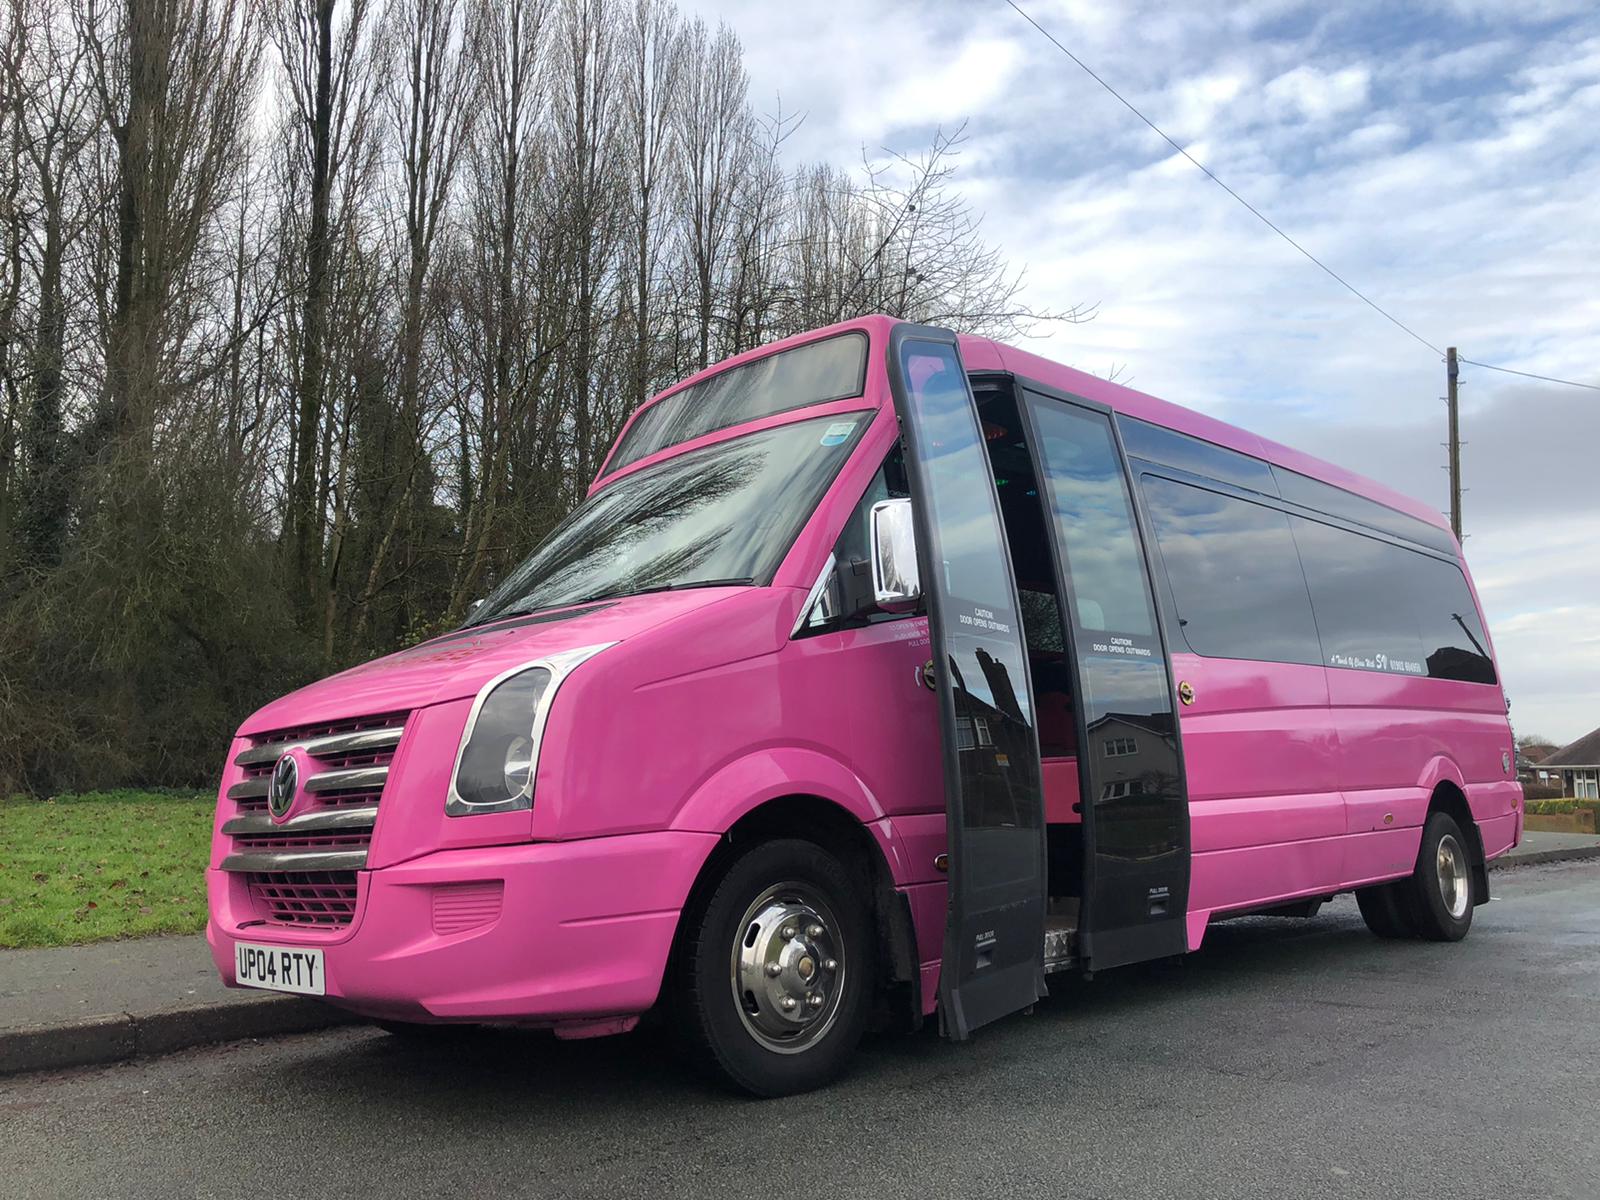 How to Find the Best UK Party Bus Deals: A Comprehensive Comparison Guide